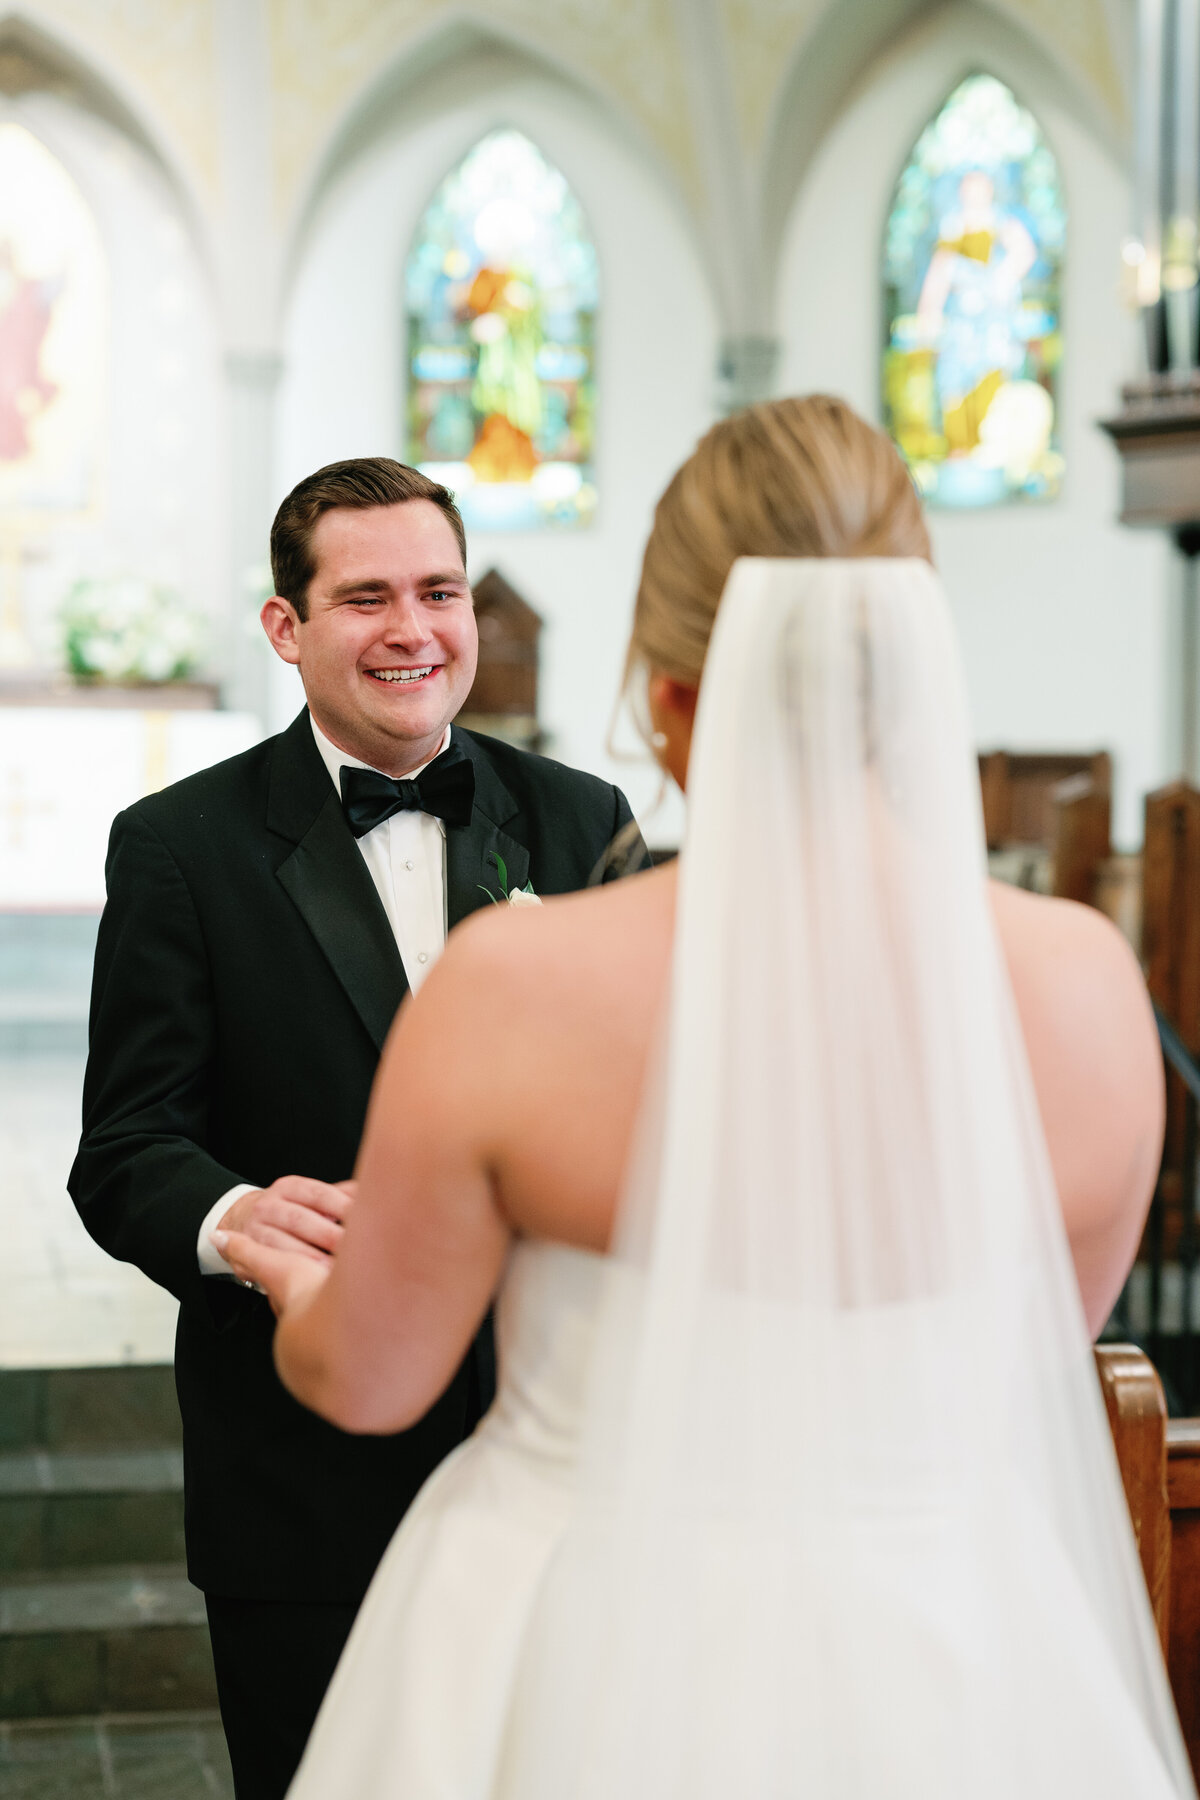 Paige and Tommy Wedding - The Press Room and St. Johns Cathedral - East Tennessee and Destination Wedding Photographer - Alaina René Photography-41